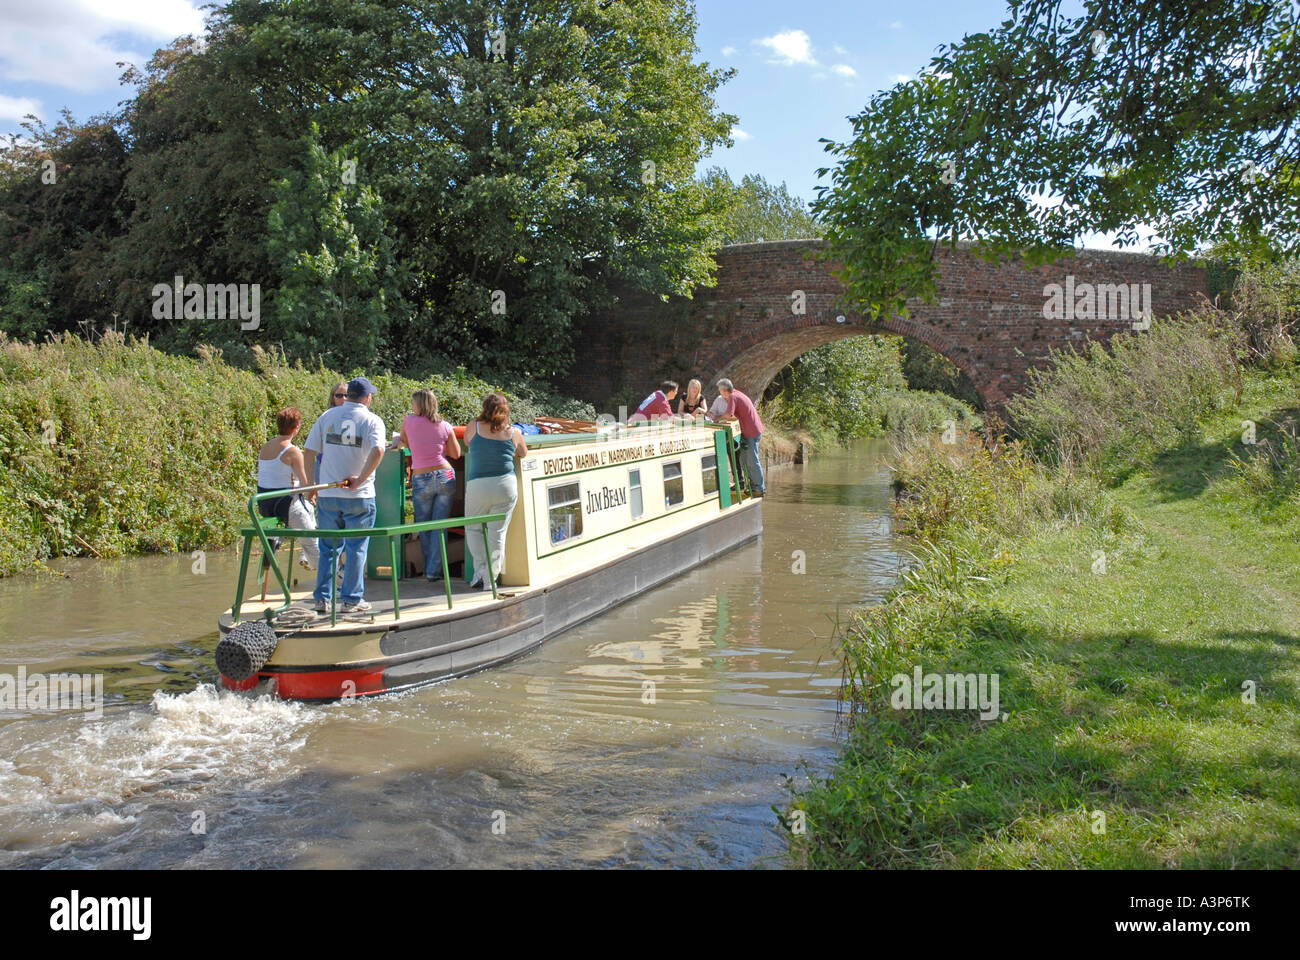 Family enjoying day out on hired day boat on Kennet & Avon canal, Wiltshire, England Stock Photo